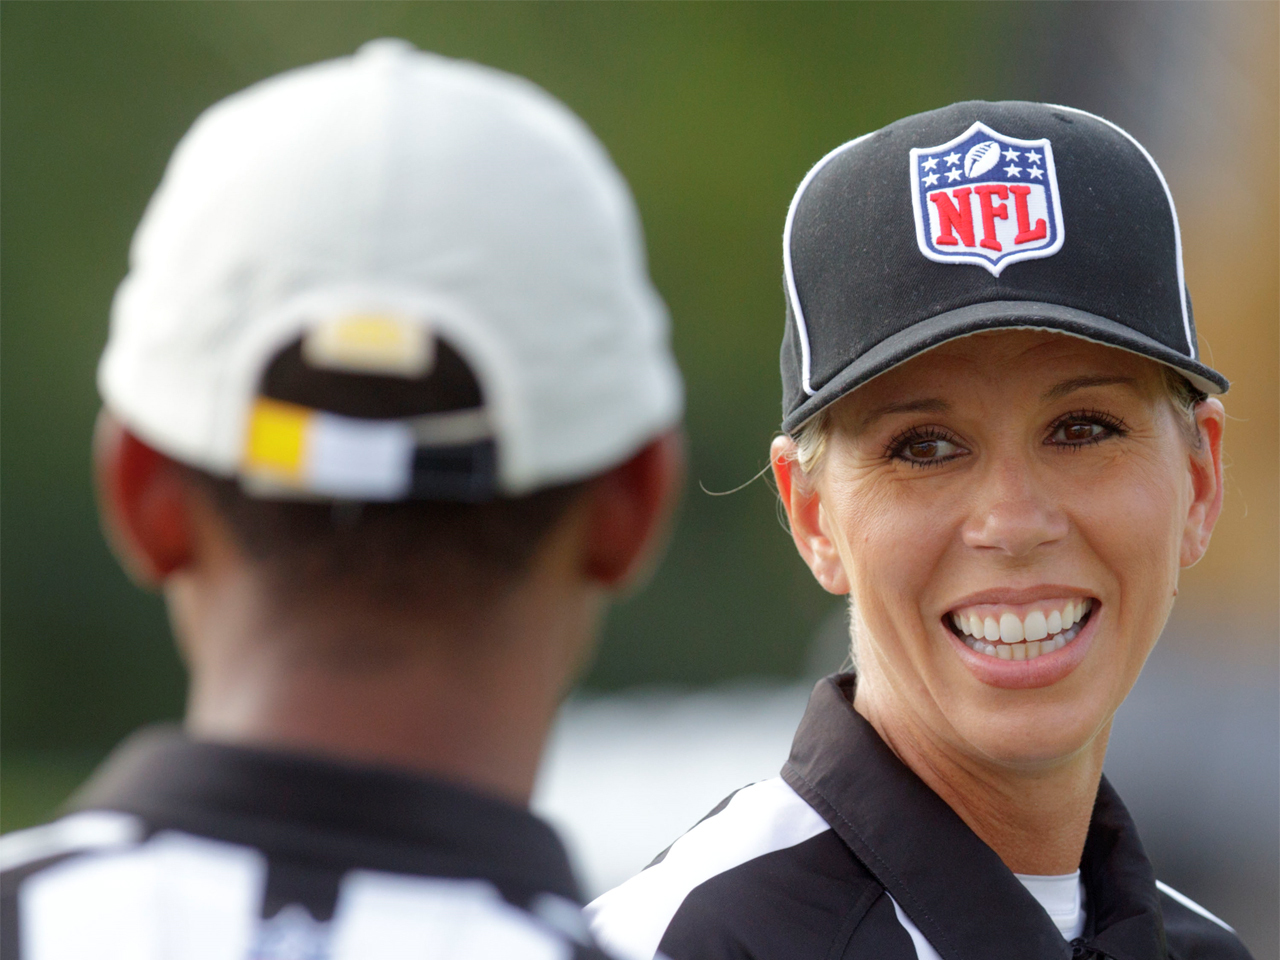 NFL Officially Hires First Full Time Female Official Sarah Thomas.